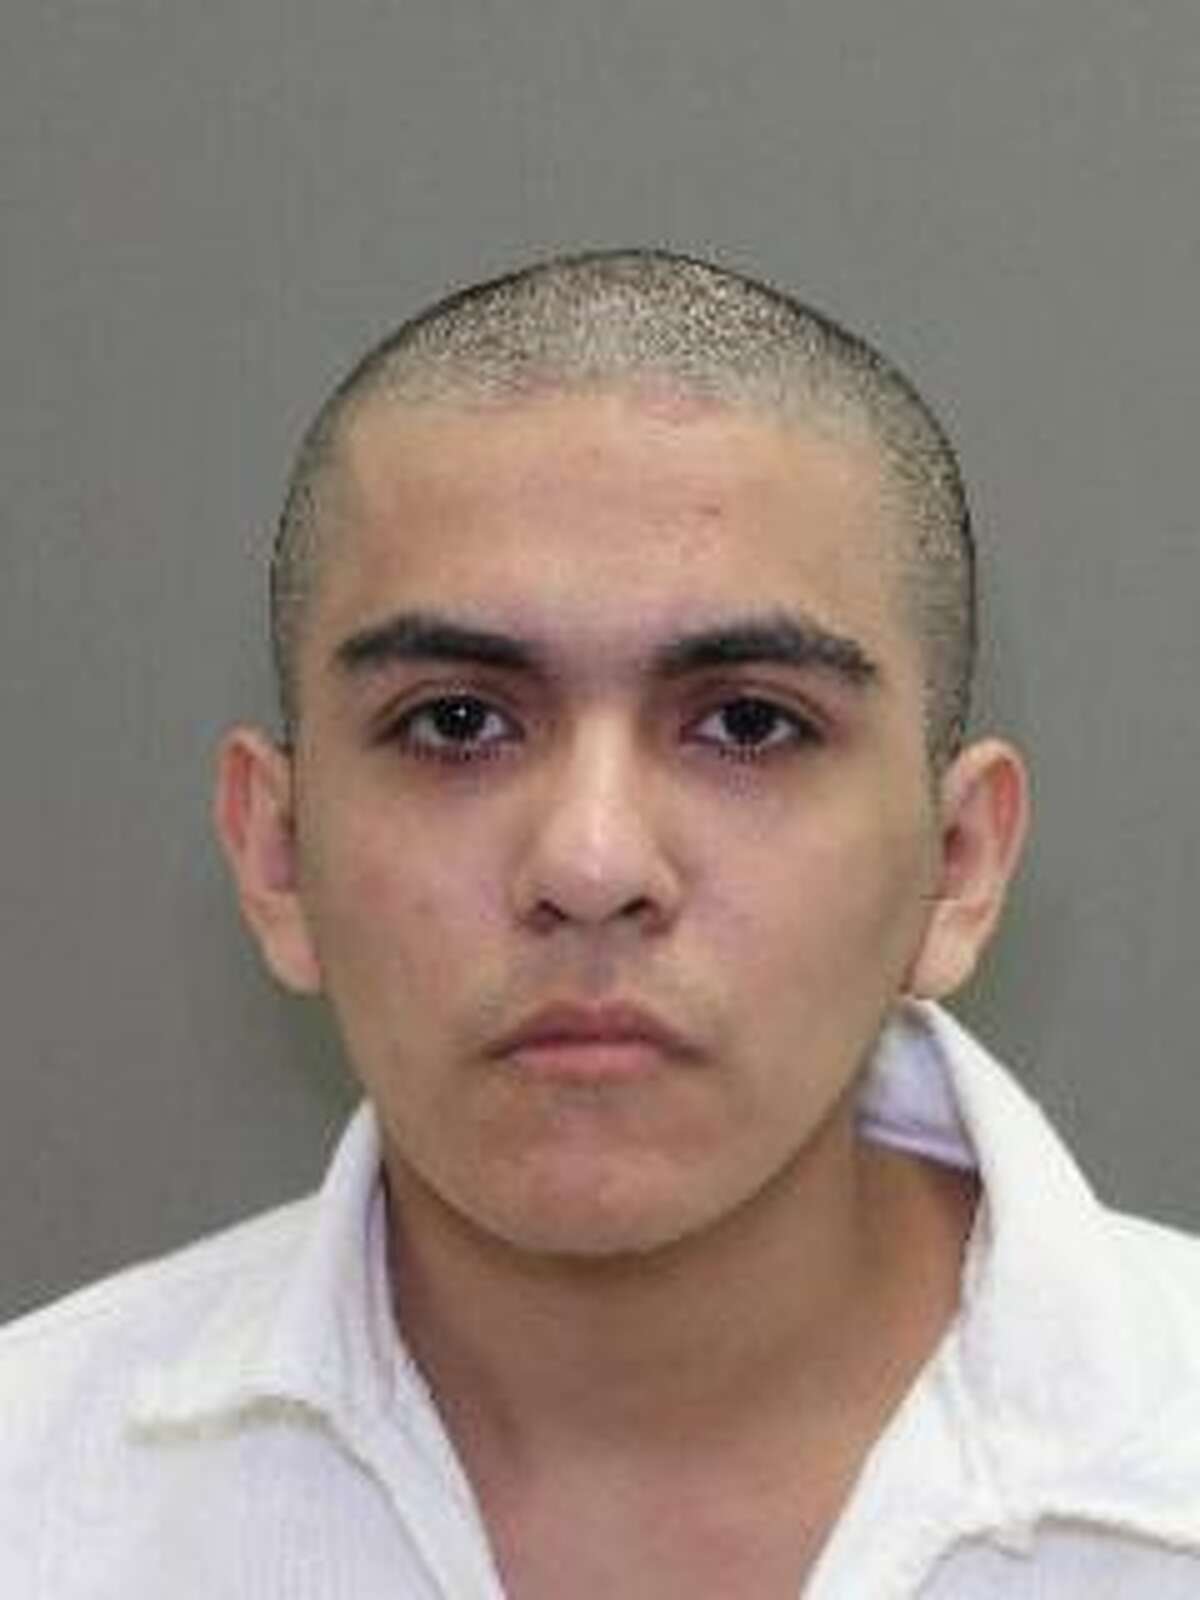 Miguel Carrera is shown here in early 2017, days before he pulled his eye out in a Texas prison after he was allegedly left unsupervised during a psychotic episode. >>>Learn about notorious prisons.